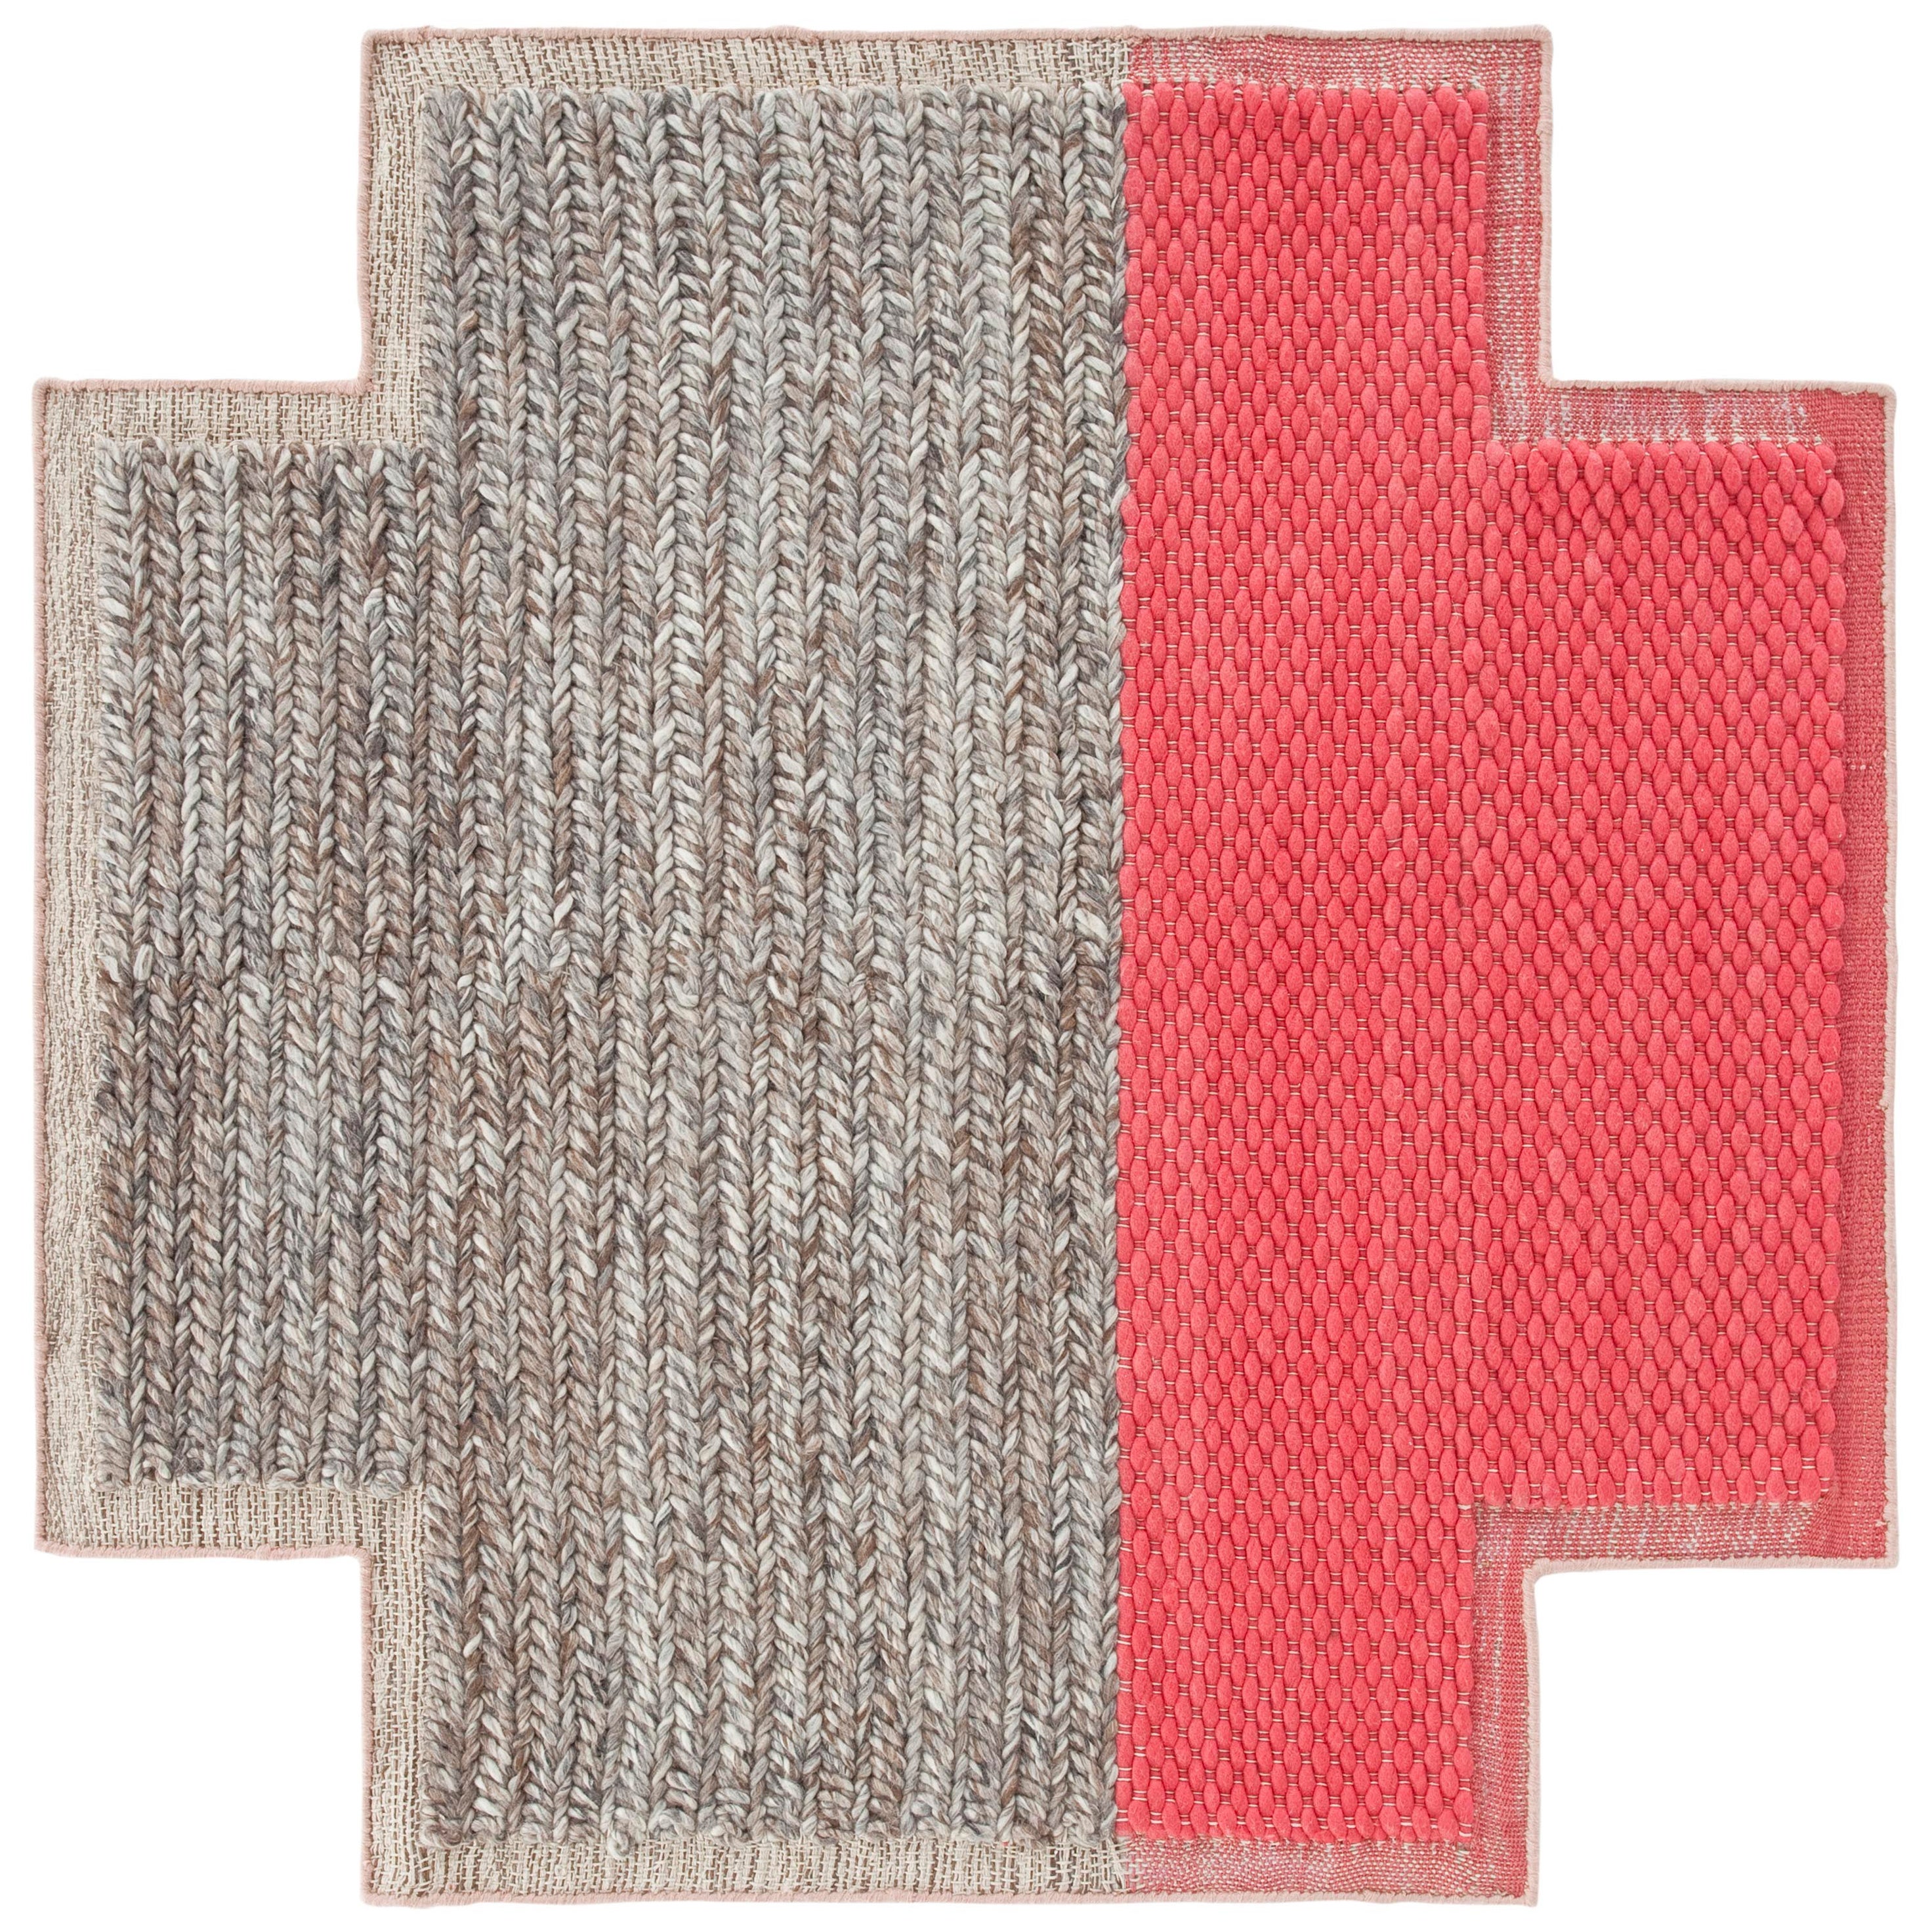 GAN Mangas Space Large Square Rug Plait in Coral by Patricia Urquiola